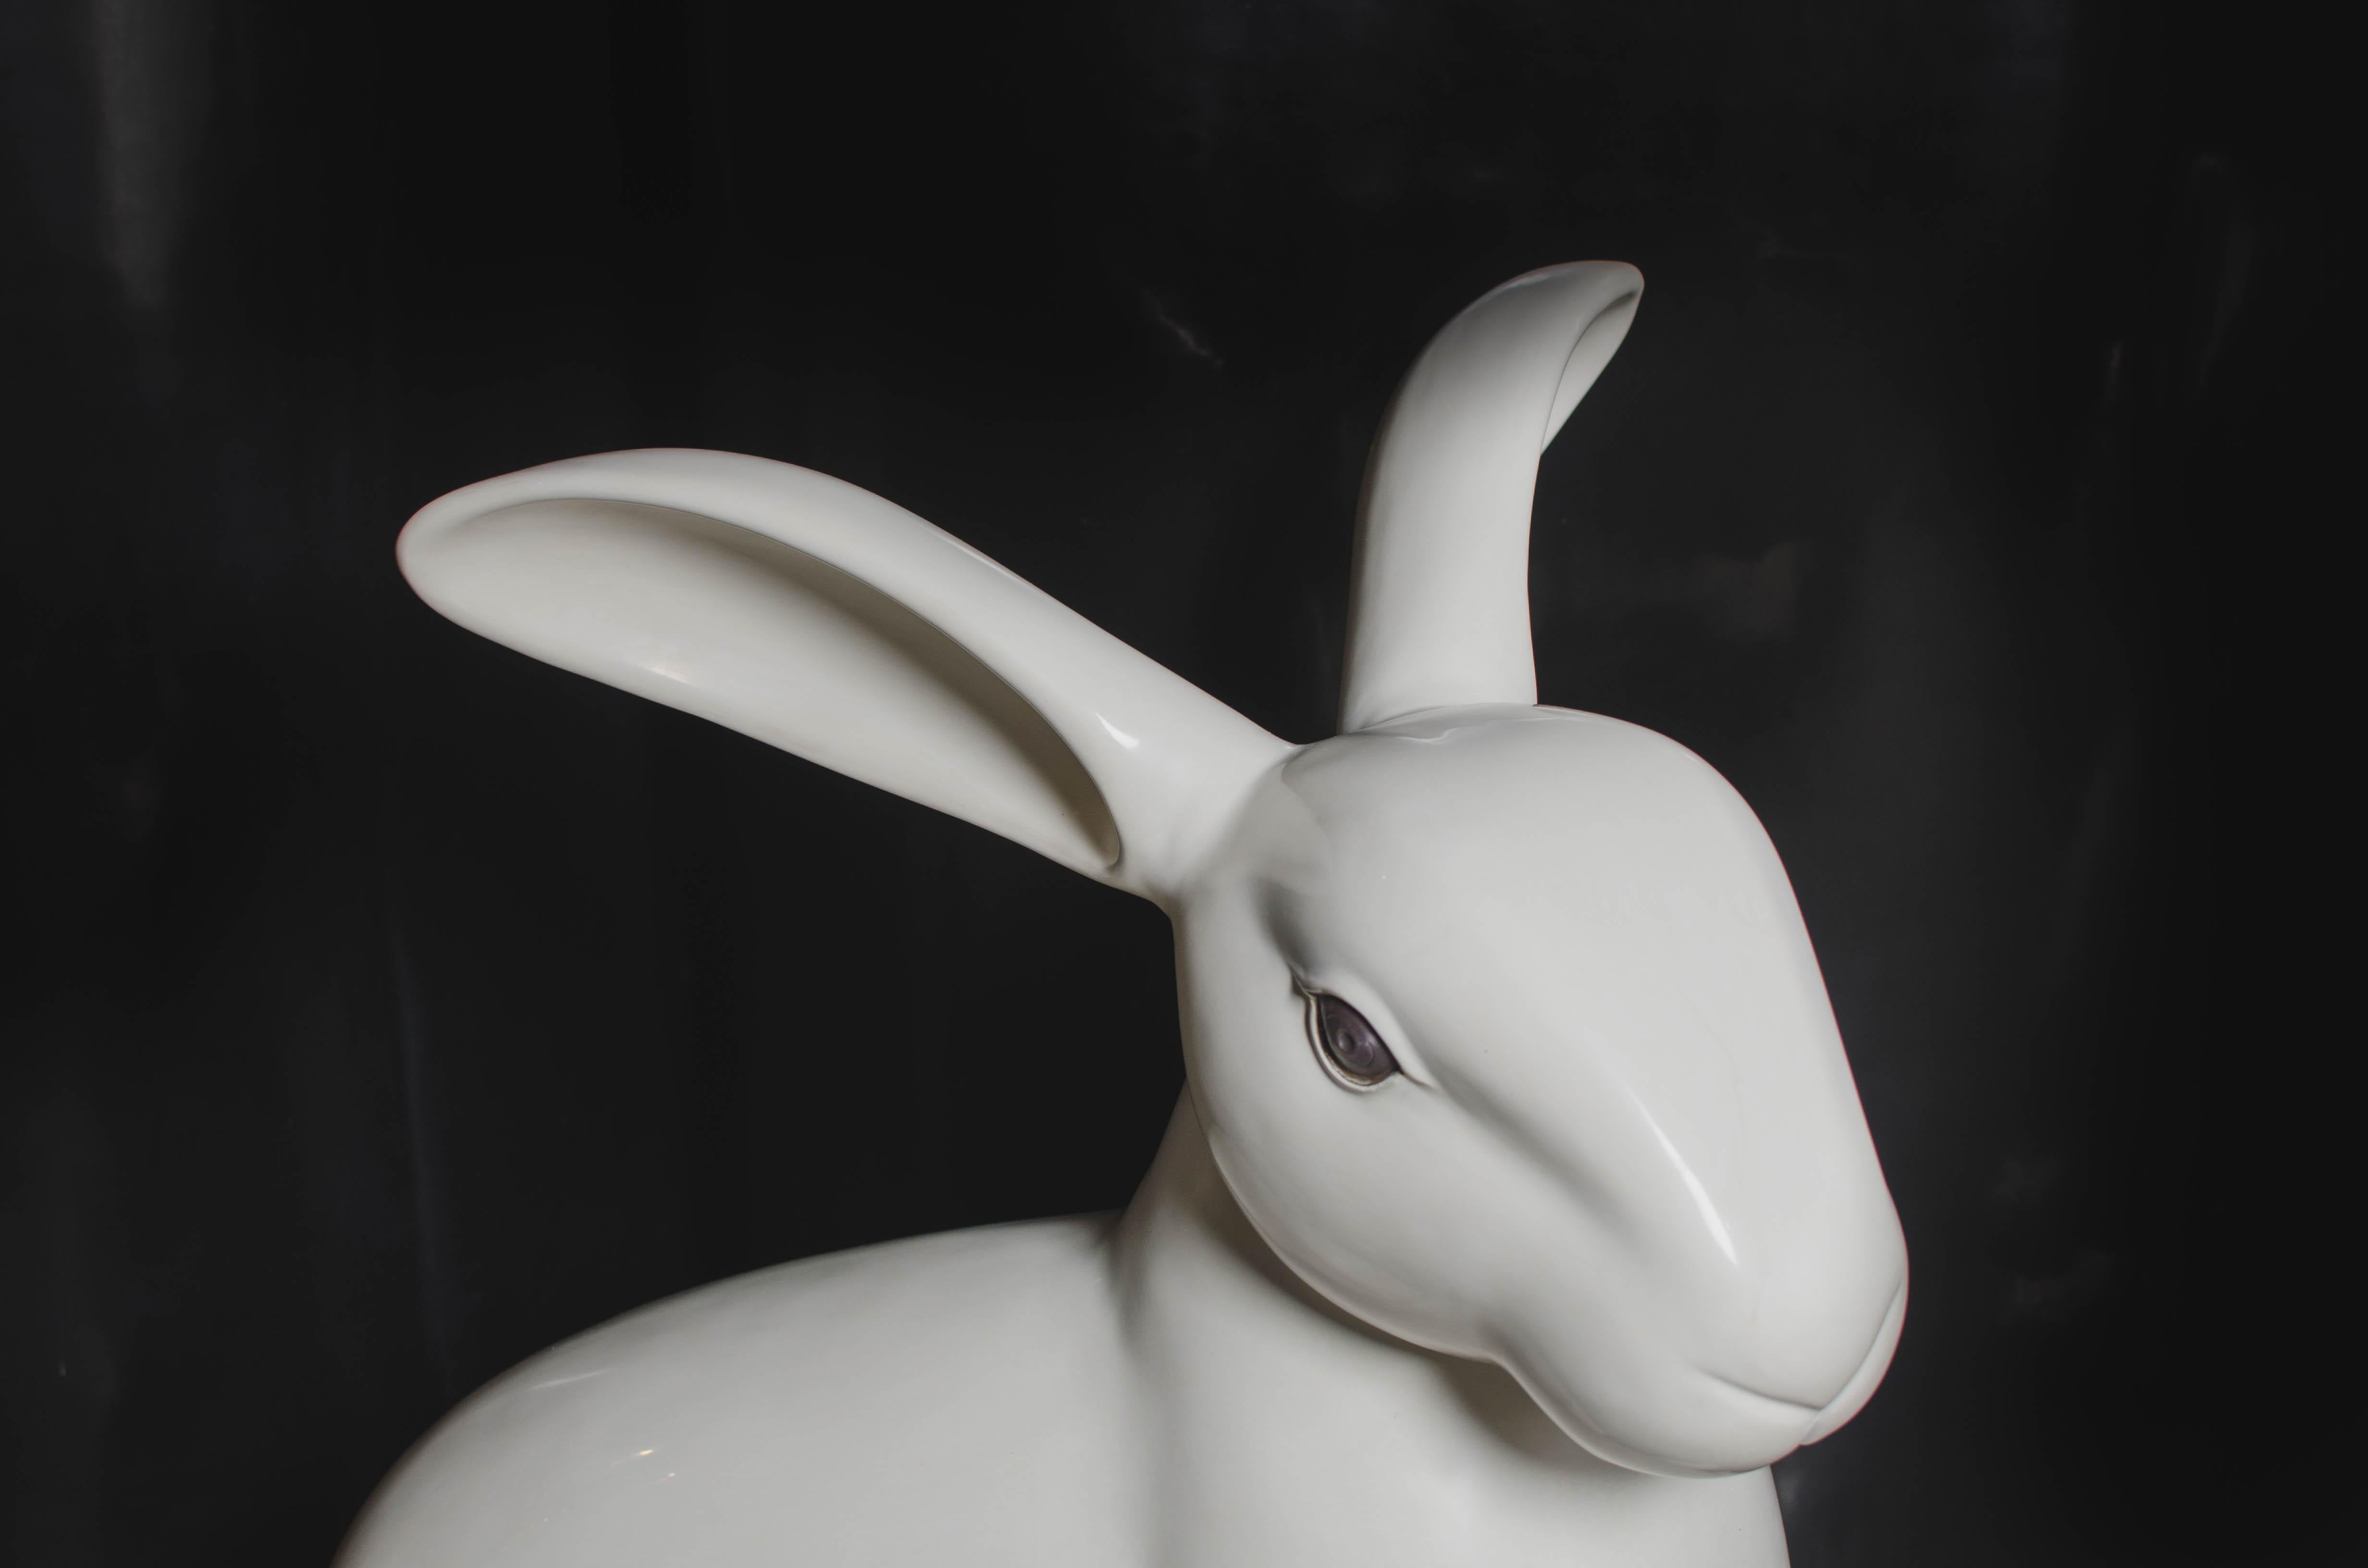 Repoussé Rabbit Sculpture, Cream Lacquer by Robert Kuo, Hand Repousse, Limited Edition